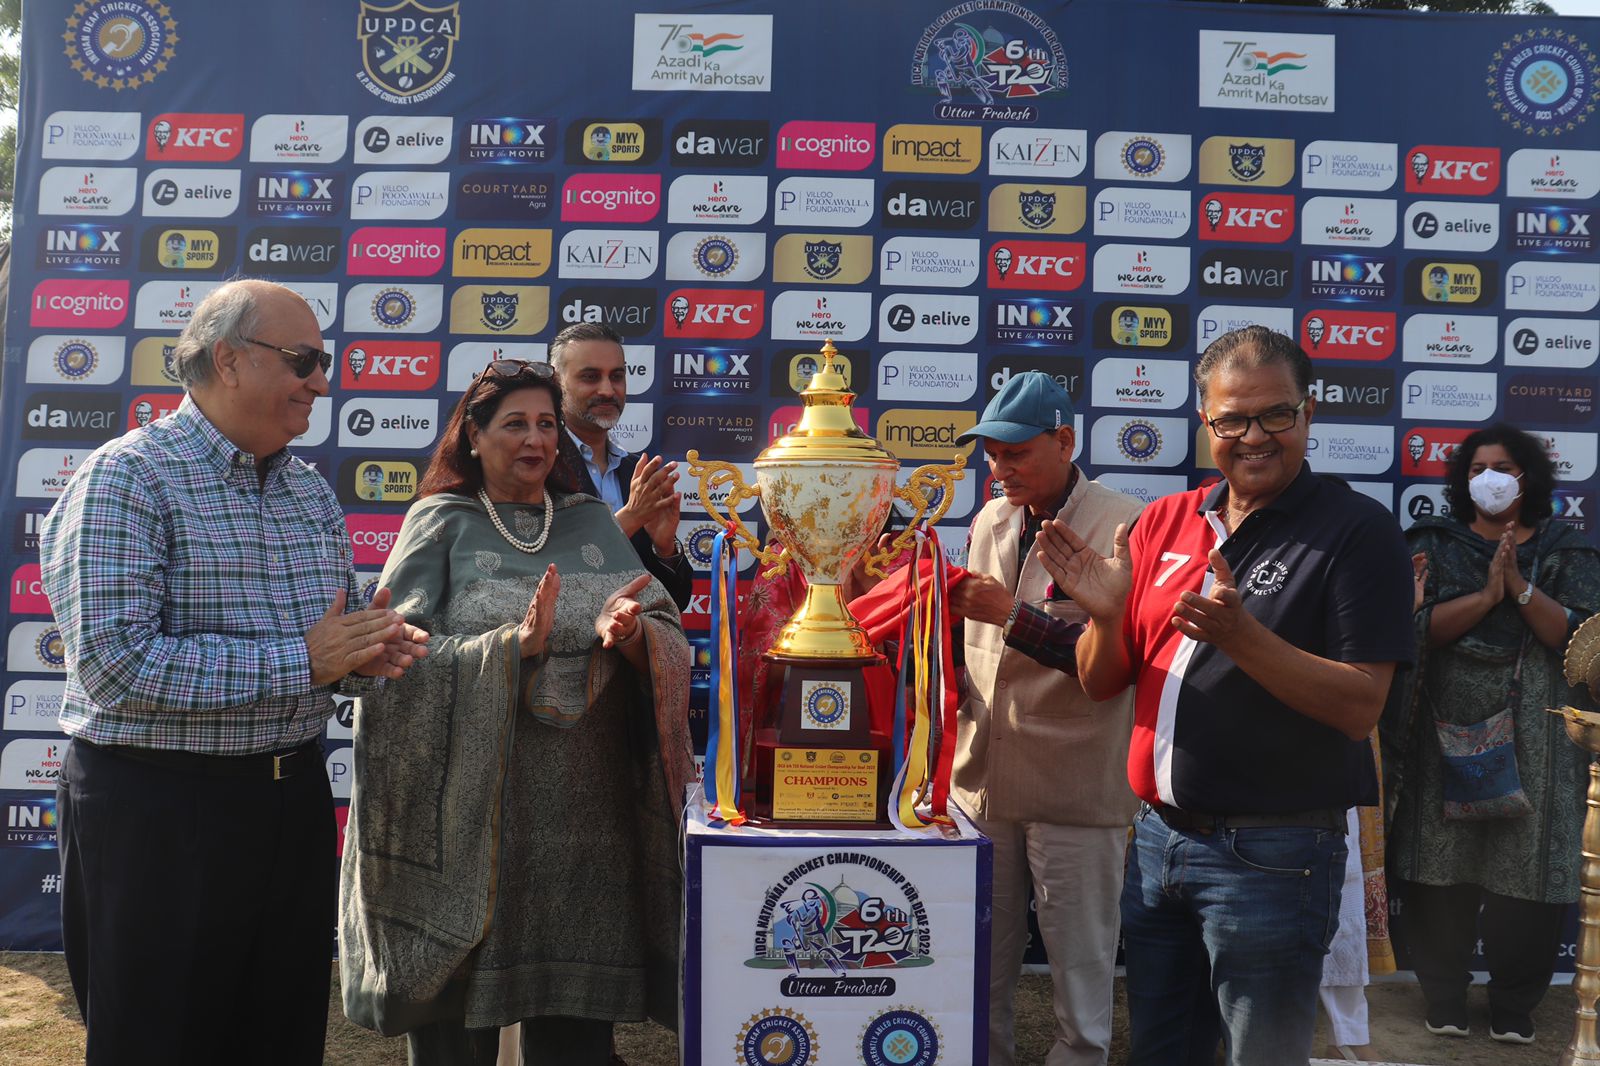 IDCA inaugurates mega tournament in Agra- IDCA 6th T20 National Cricket Championship for deaf on 14th November 2022